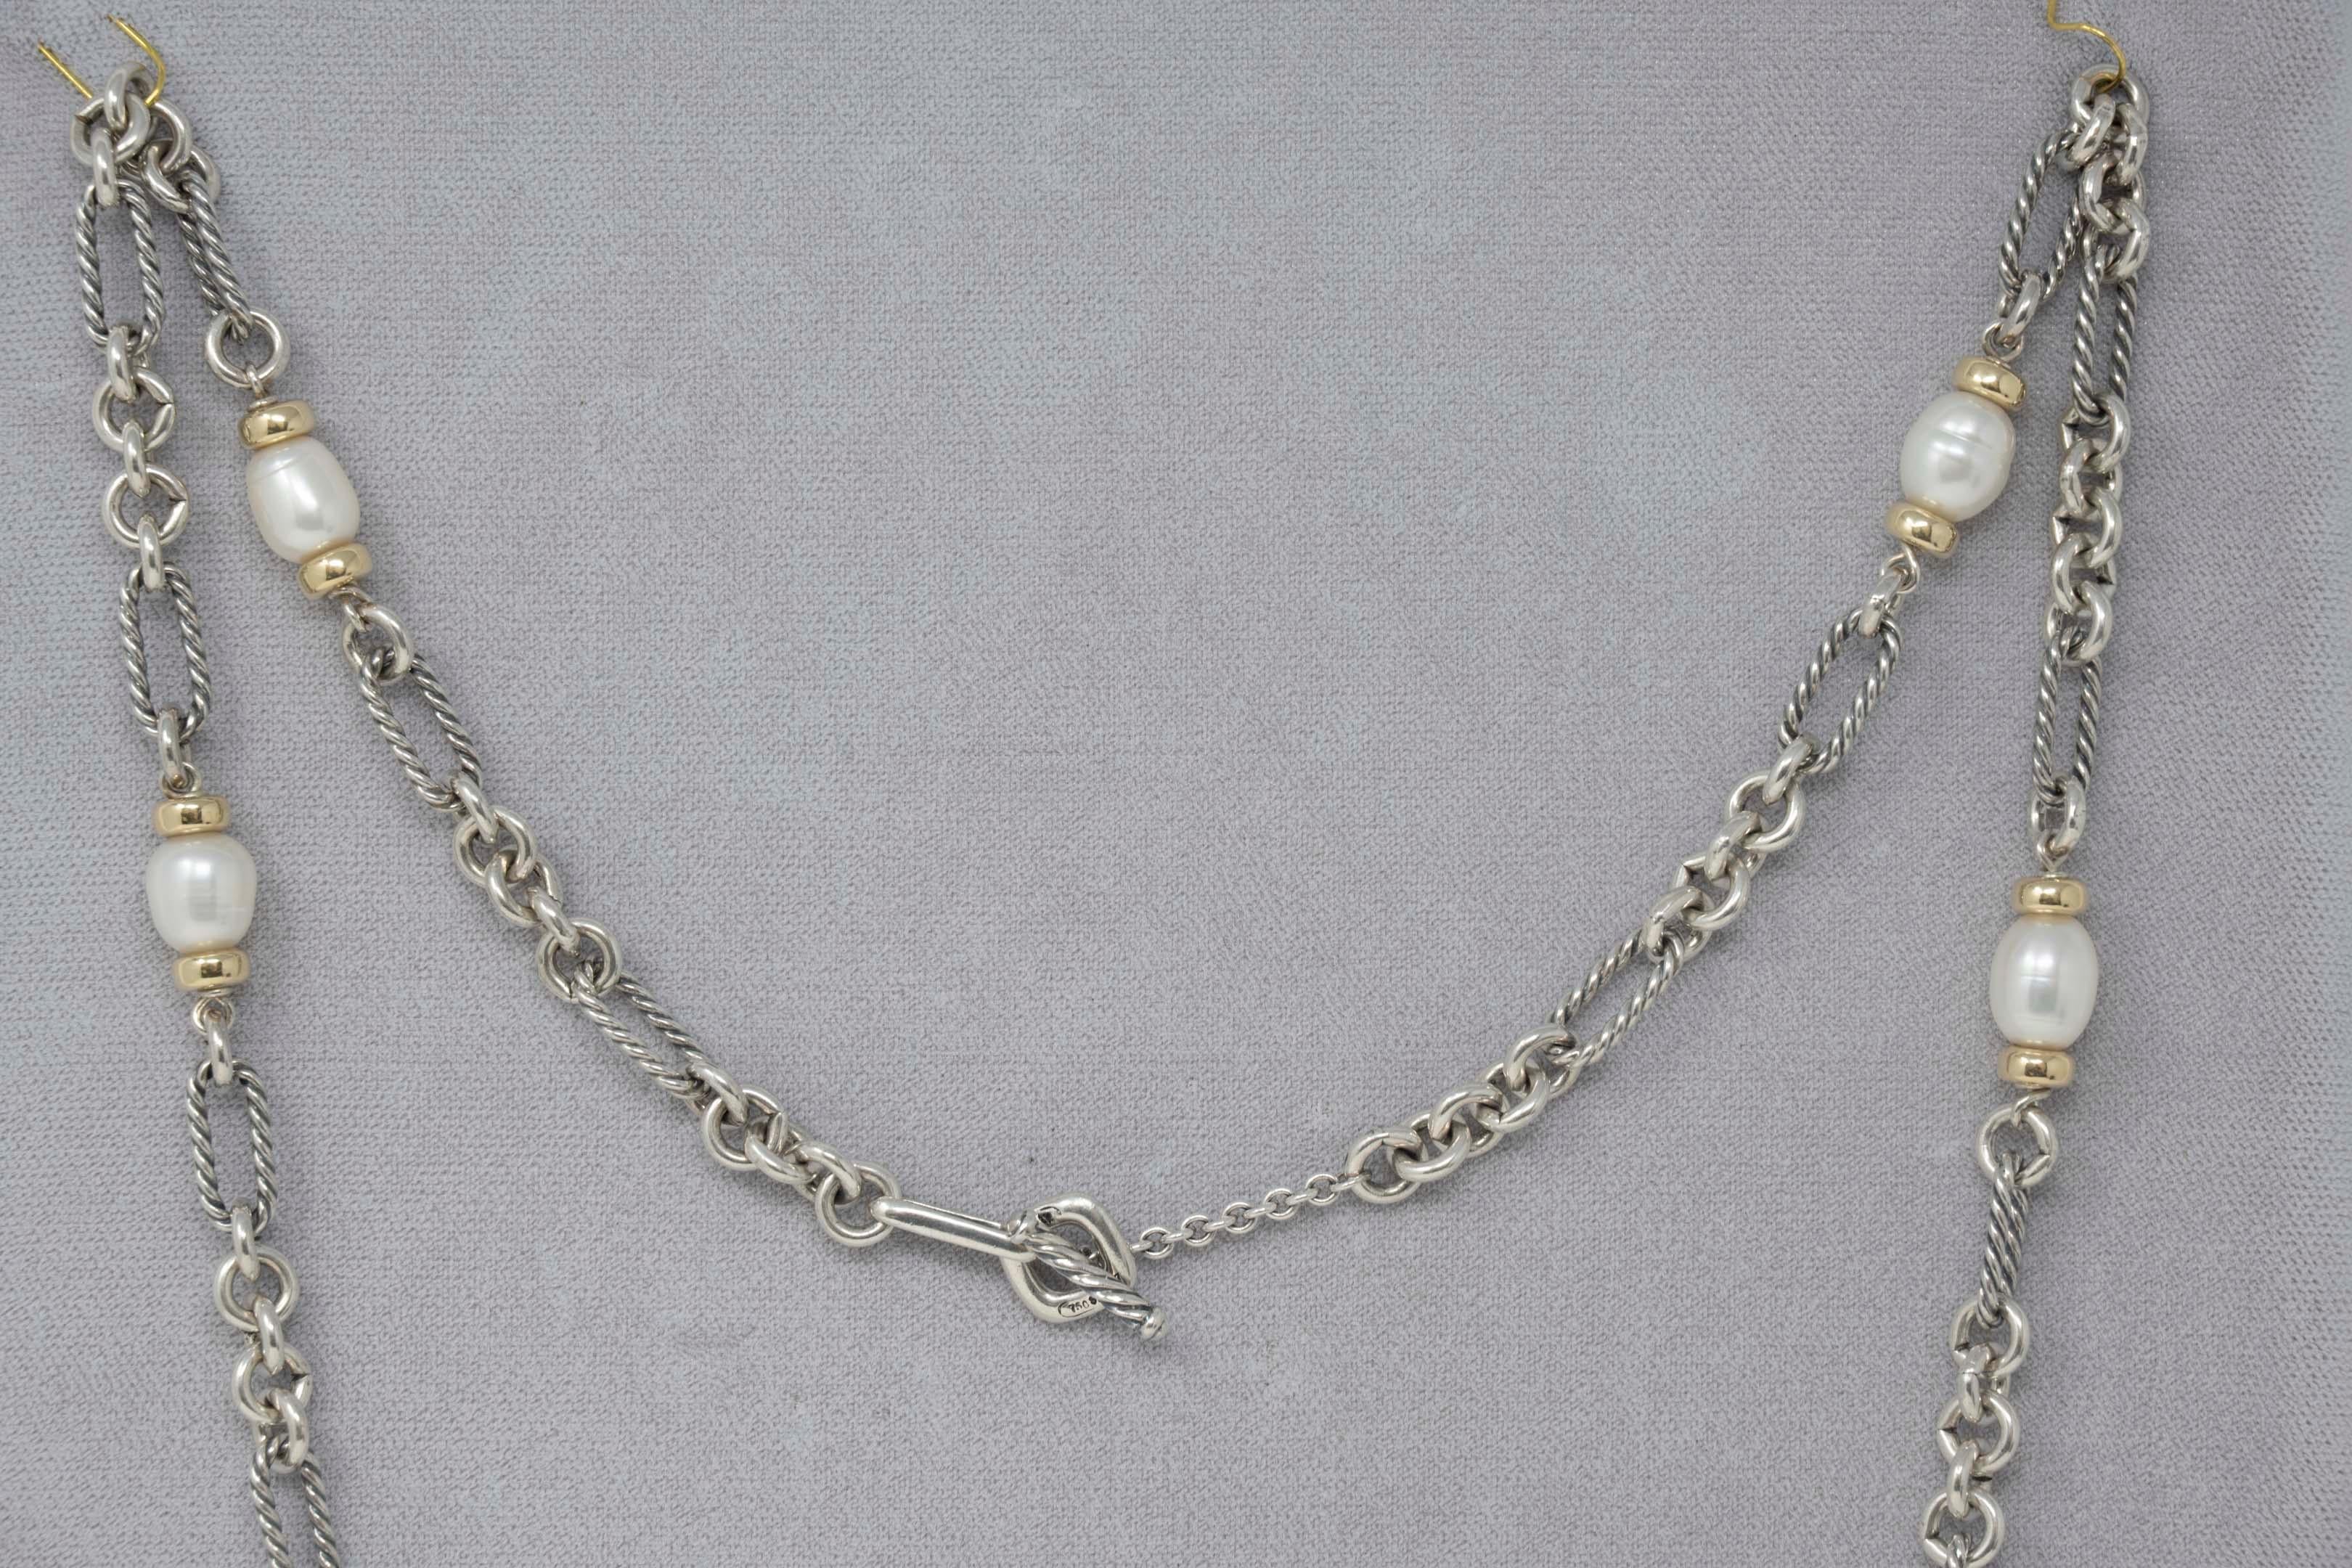 David Yurman link pearls necklace, stamped D.Y. 750, 925. 33.5 inches long with 7 pearls and a toggle closure, 81.6 grams. In good condition, period 2010.
